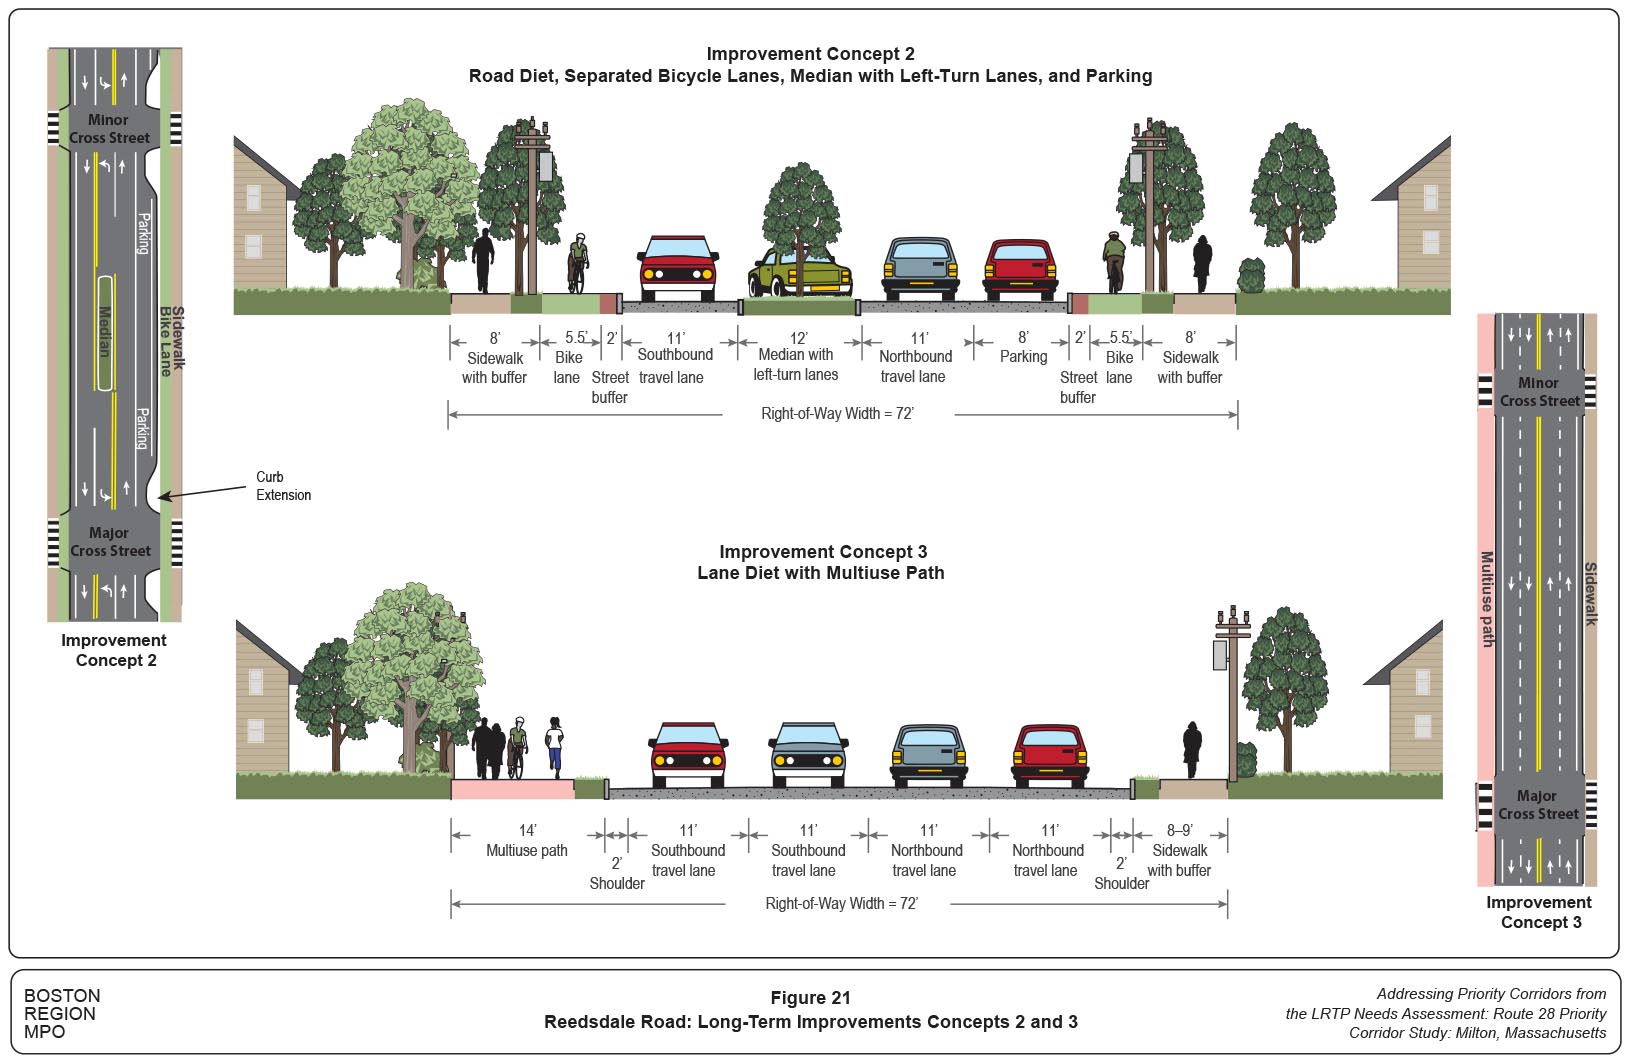 Figure 21
Reedsdale Road: Long-Term Improvements Concepts 2 and 3
Figure 21 shows the cross-sectional configuration of Reedsdale Road long-term improvements for Concepts 2 and 3.
